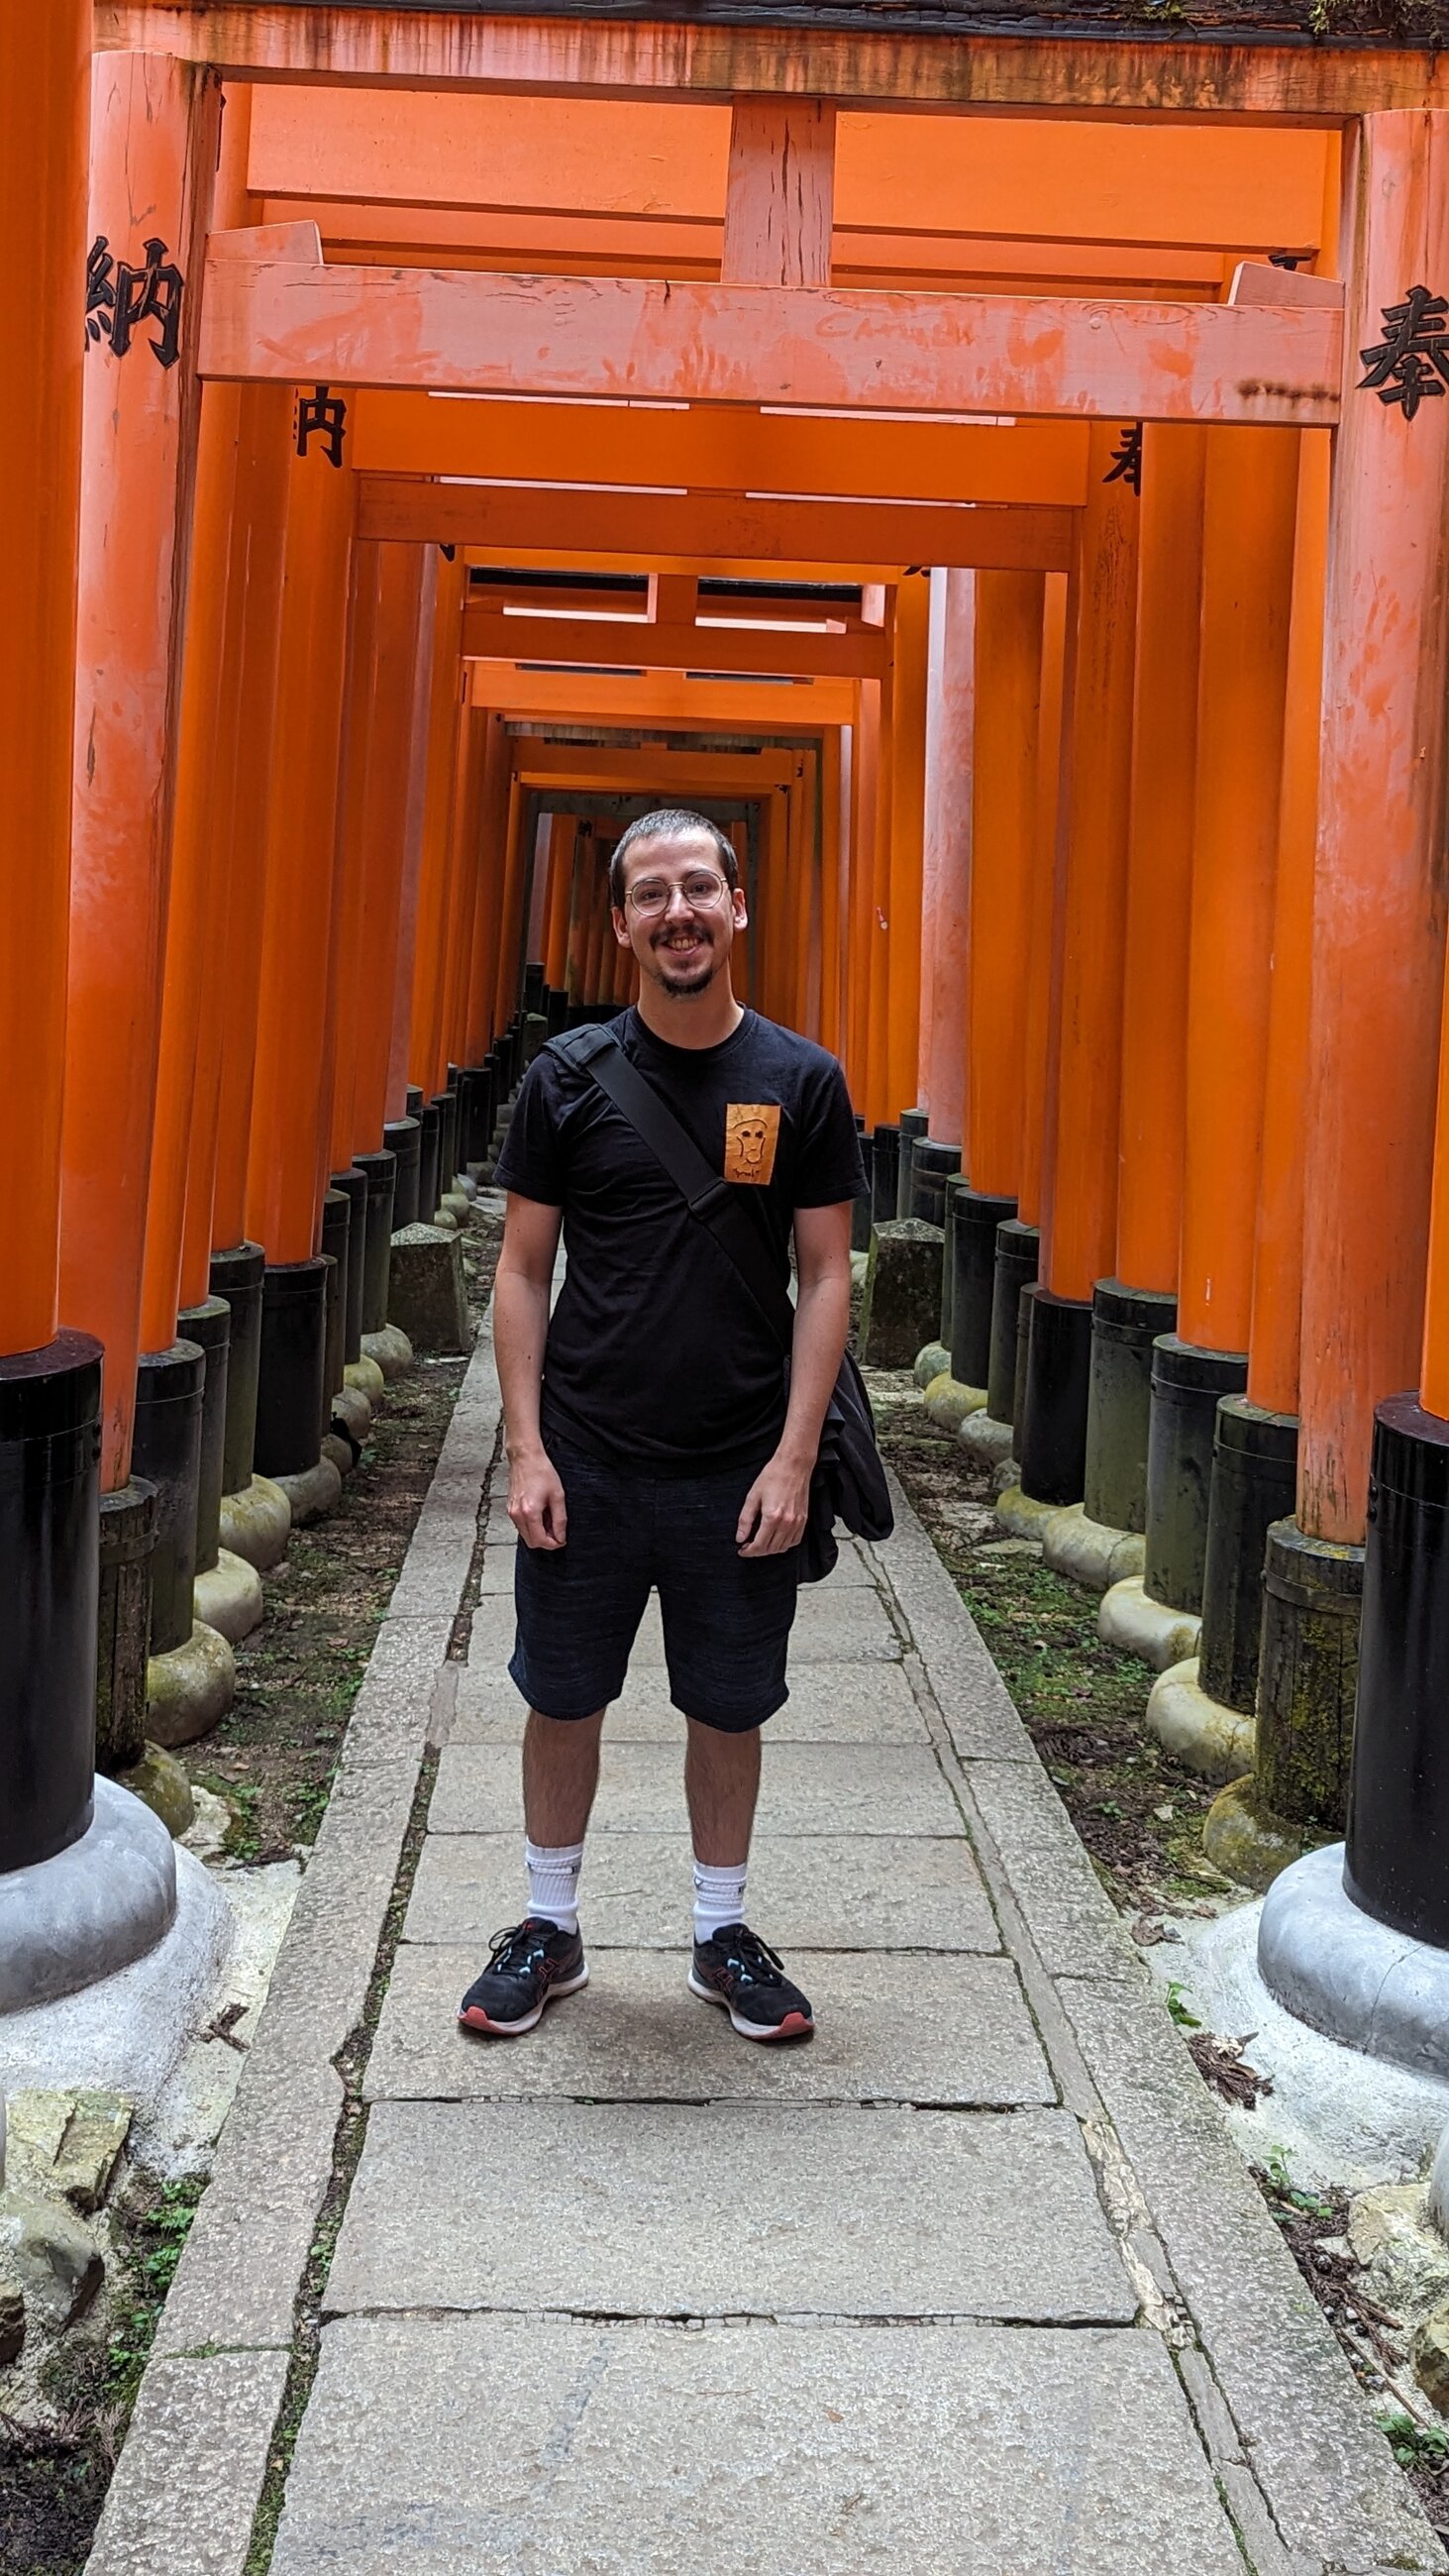 Under Fushimi Inari torii gates in Kyoto. An hour away from my placement.